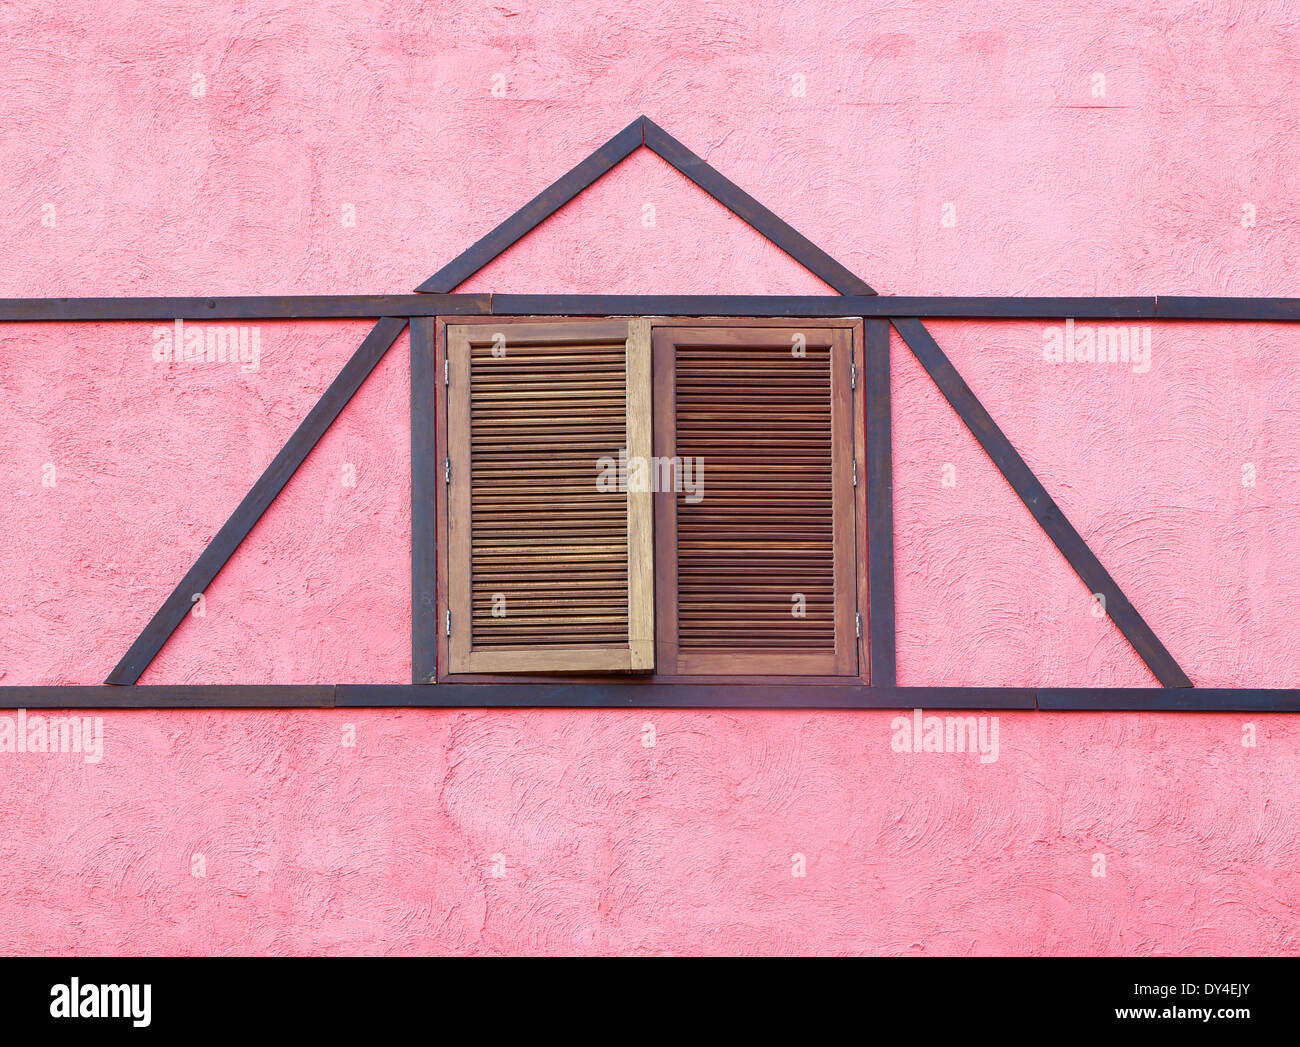 wooden window and wall background Stock Photo